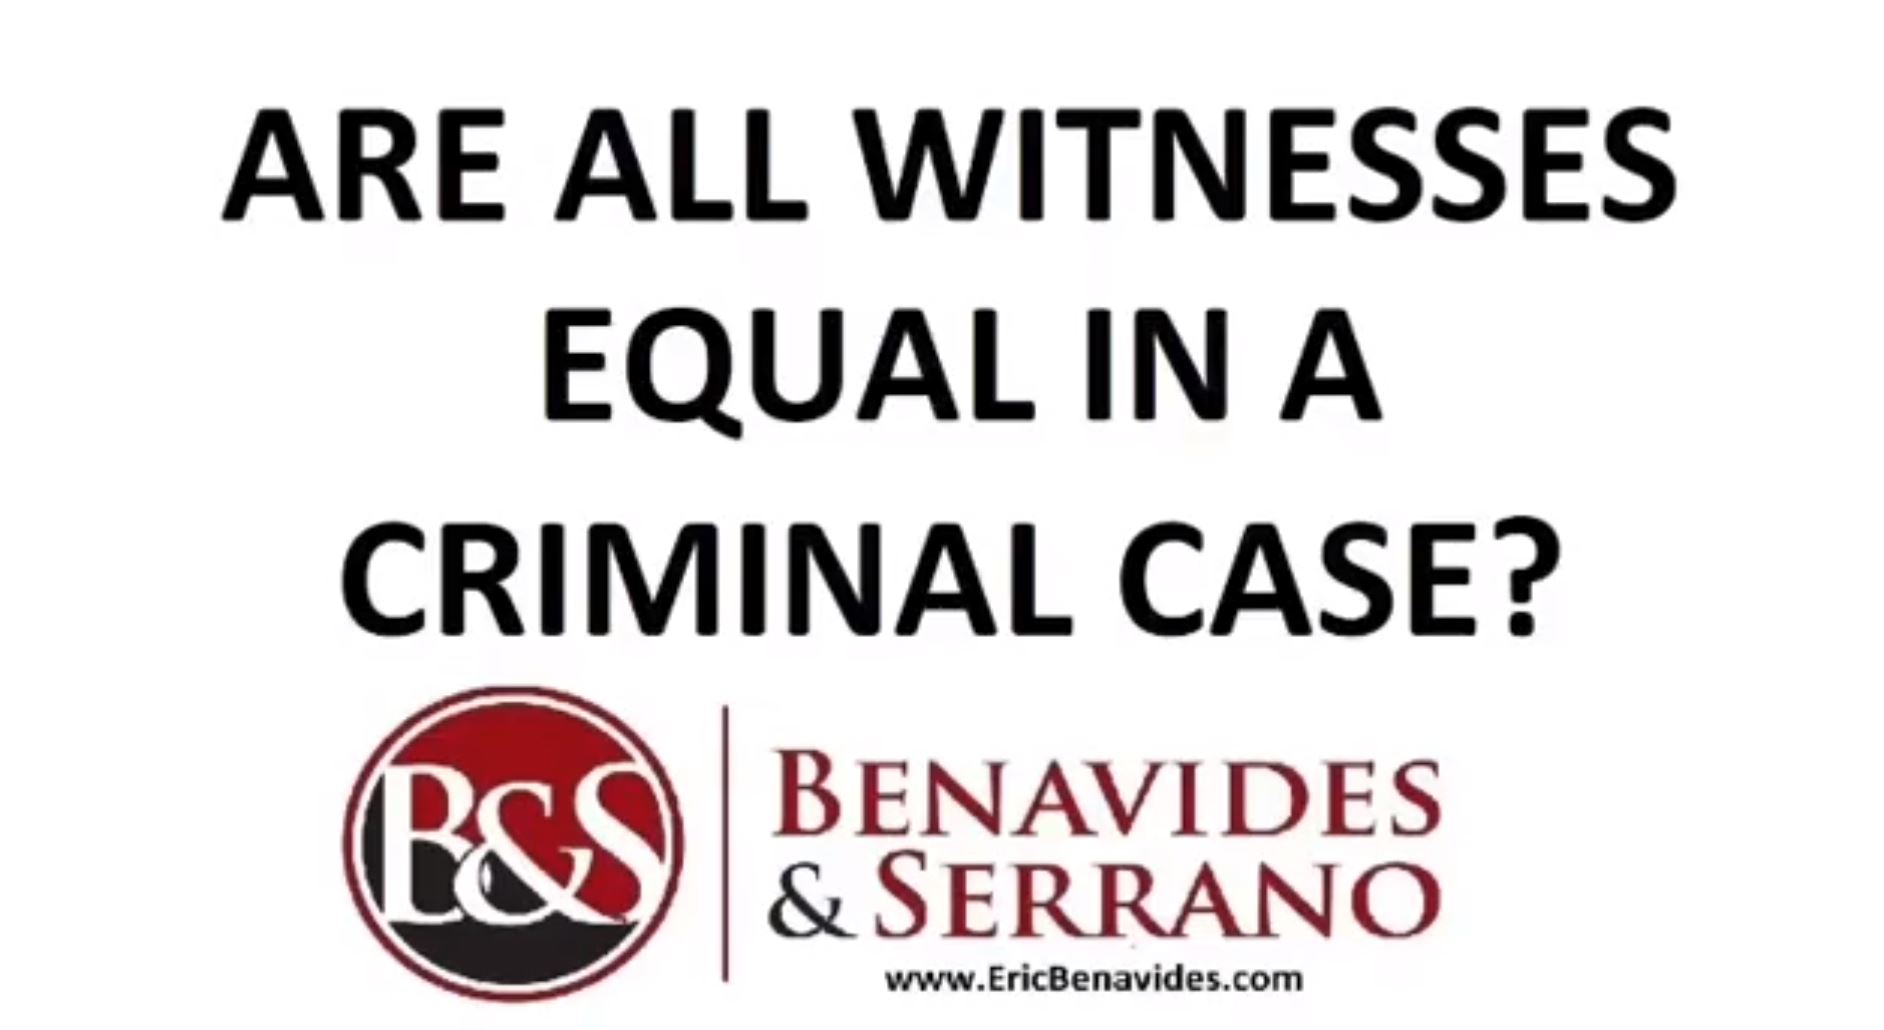 Are all witnesses equal in a criminal case.